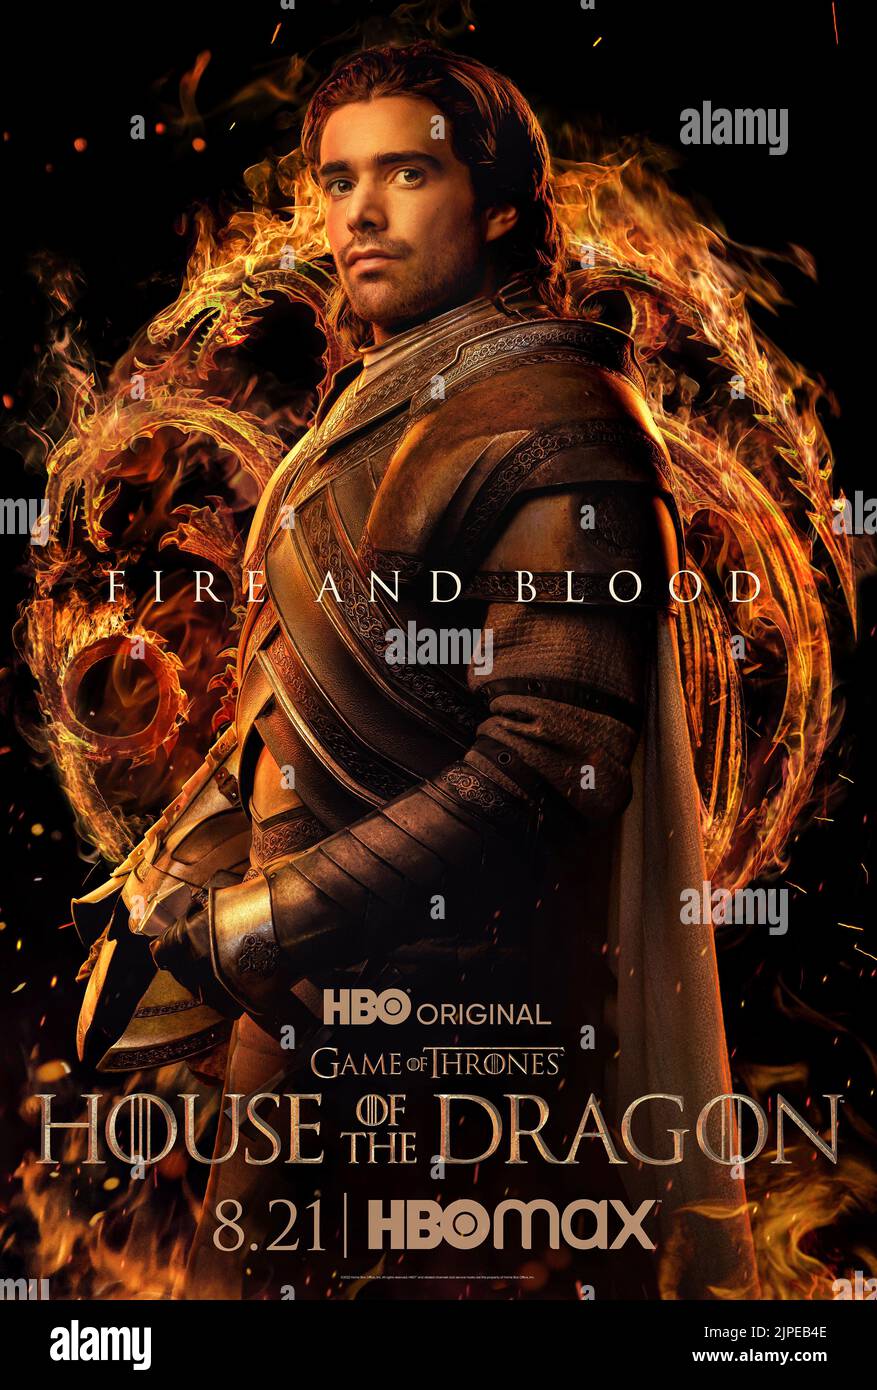 USA. Fabien Frankel   in the (C)HBO new series: House of the Dragon (2022).  Plot: The story of the House Targaryen set 300 years before the events of Game of Thrones (2011).  Ref: LMK106-J8255-150822 Supplied by LMKMEDIA. Editorial Only. Landmark Media is not the copyright owner of these Film or TV stills but provides a service only for recognised Media outlets. pictures@lmkmedia.com Stock Photo